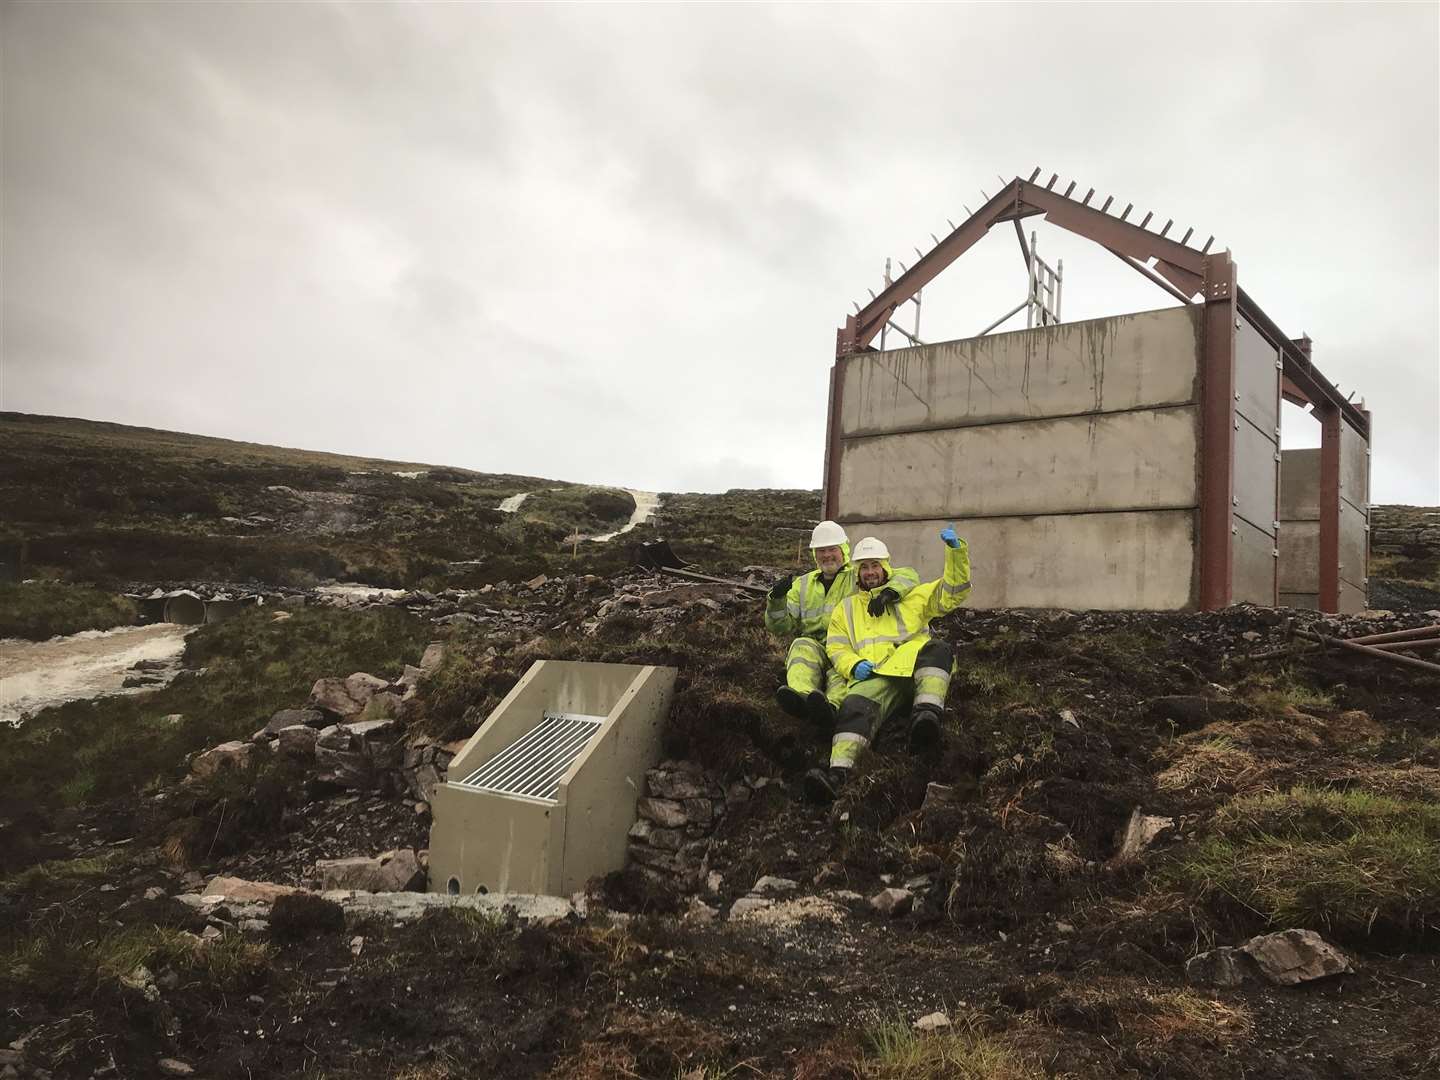 Hugh and Michael Maclellan of Laid in front of the powerhouse during the build. The scheme operates at 10 bar pressure and can be controlled from Michael’s iphone.